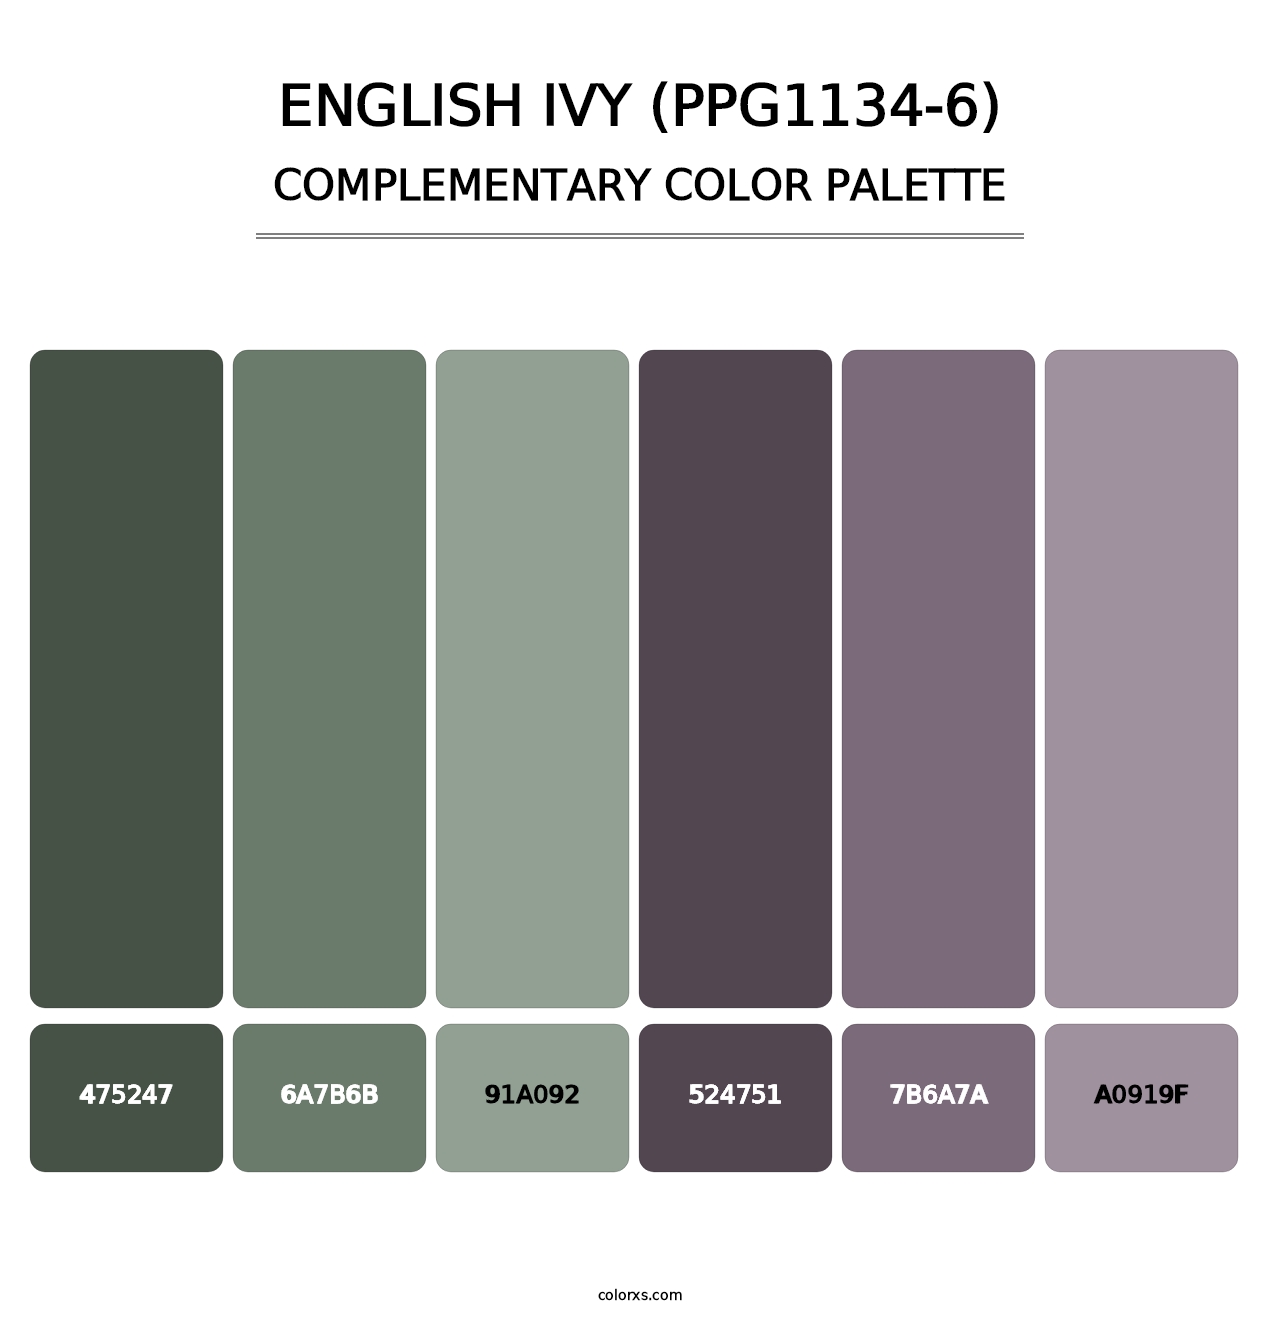 English Ivy (PPG1134-6) - Complementary Color Palette